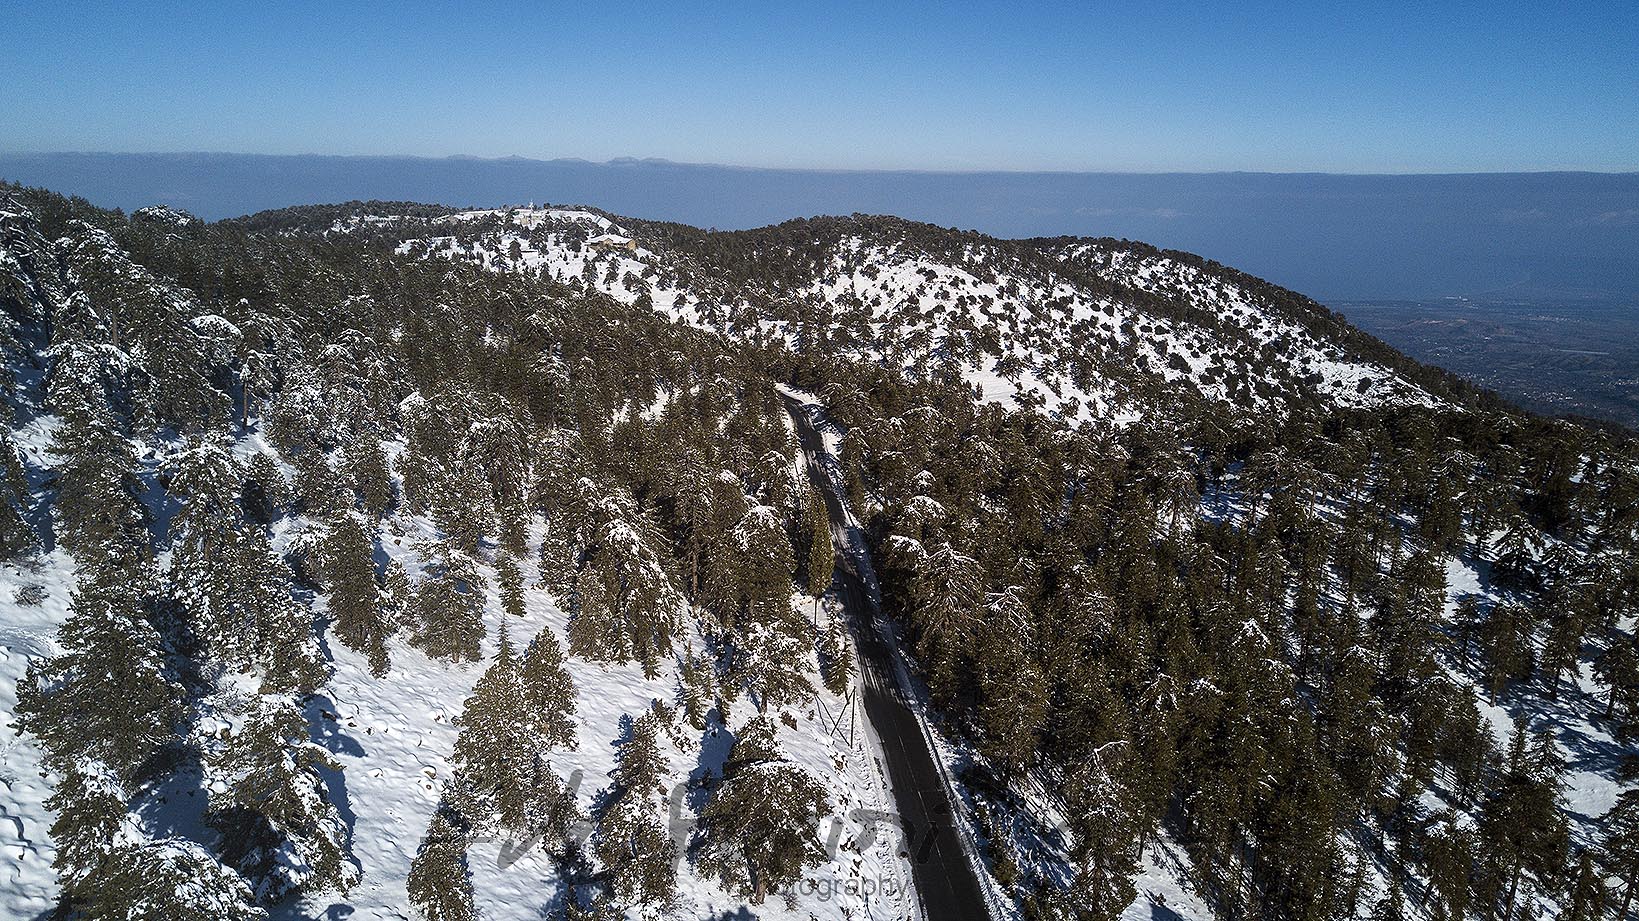 24-12-2021 Troodos mountains Cyprus-drone shot